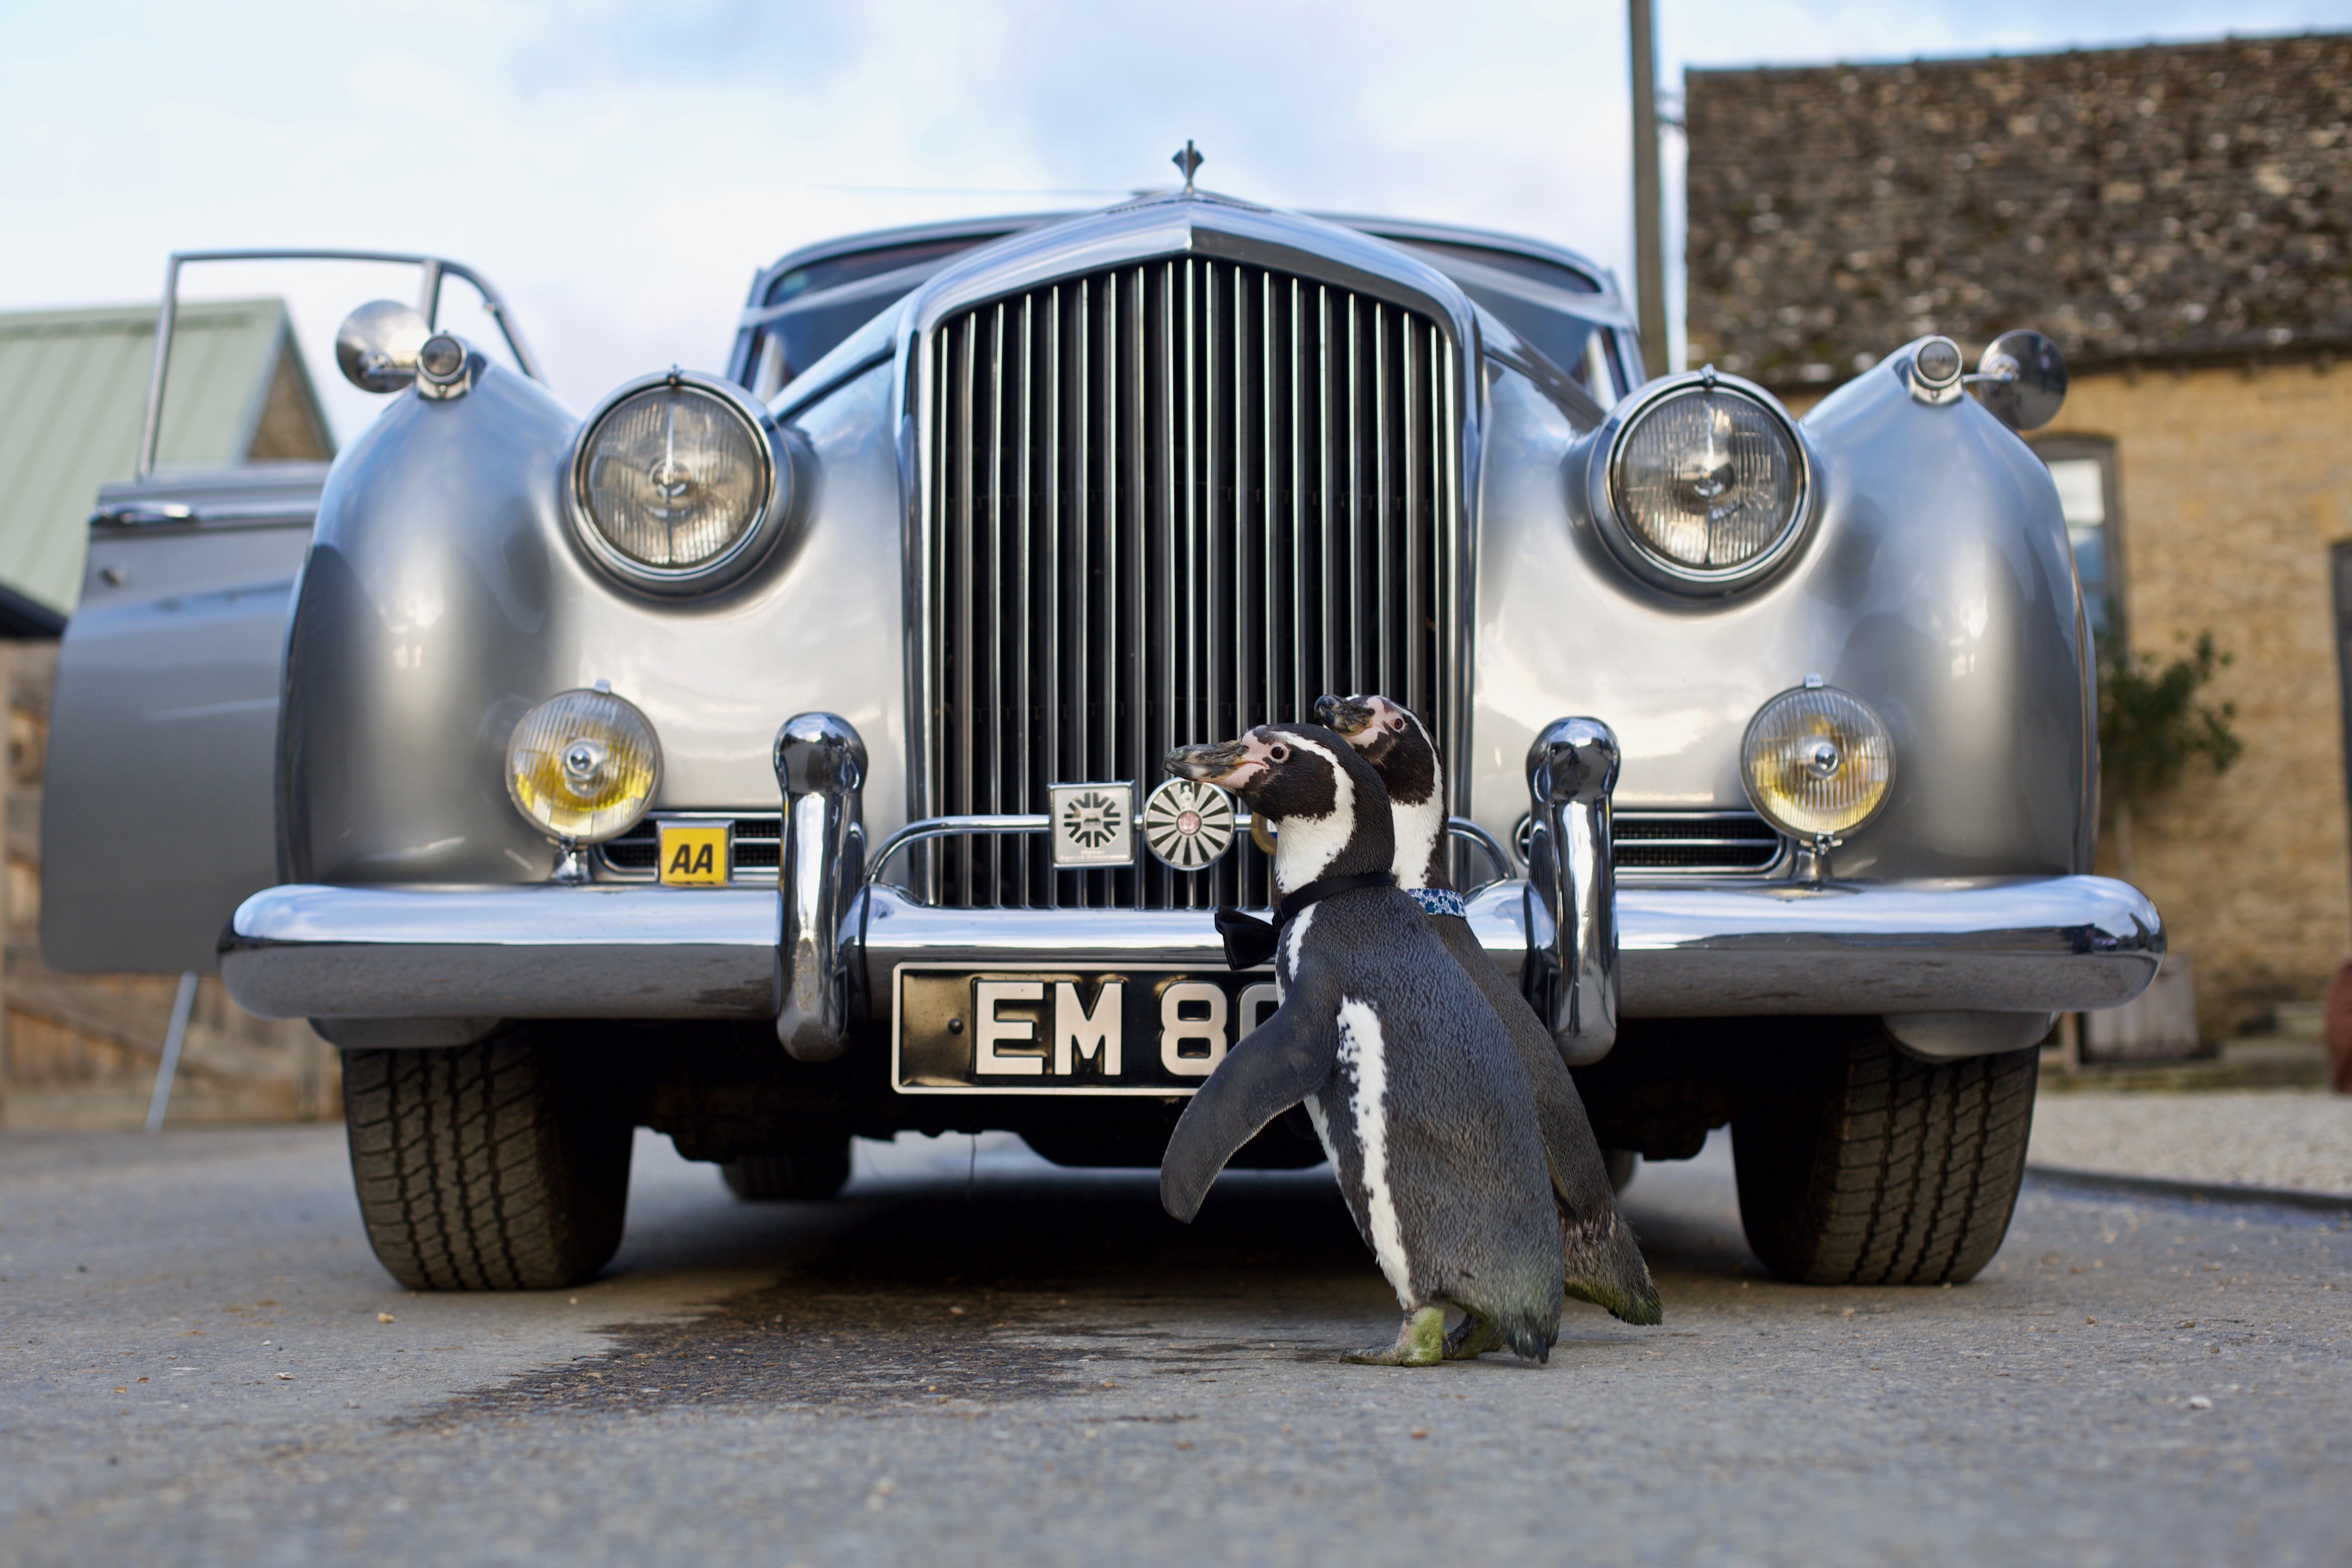 The penguins with their wedding car